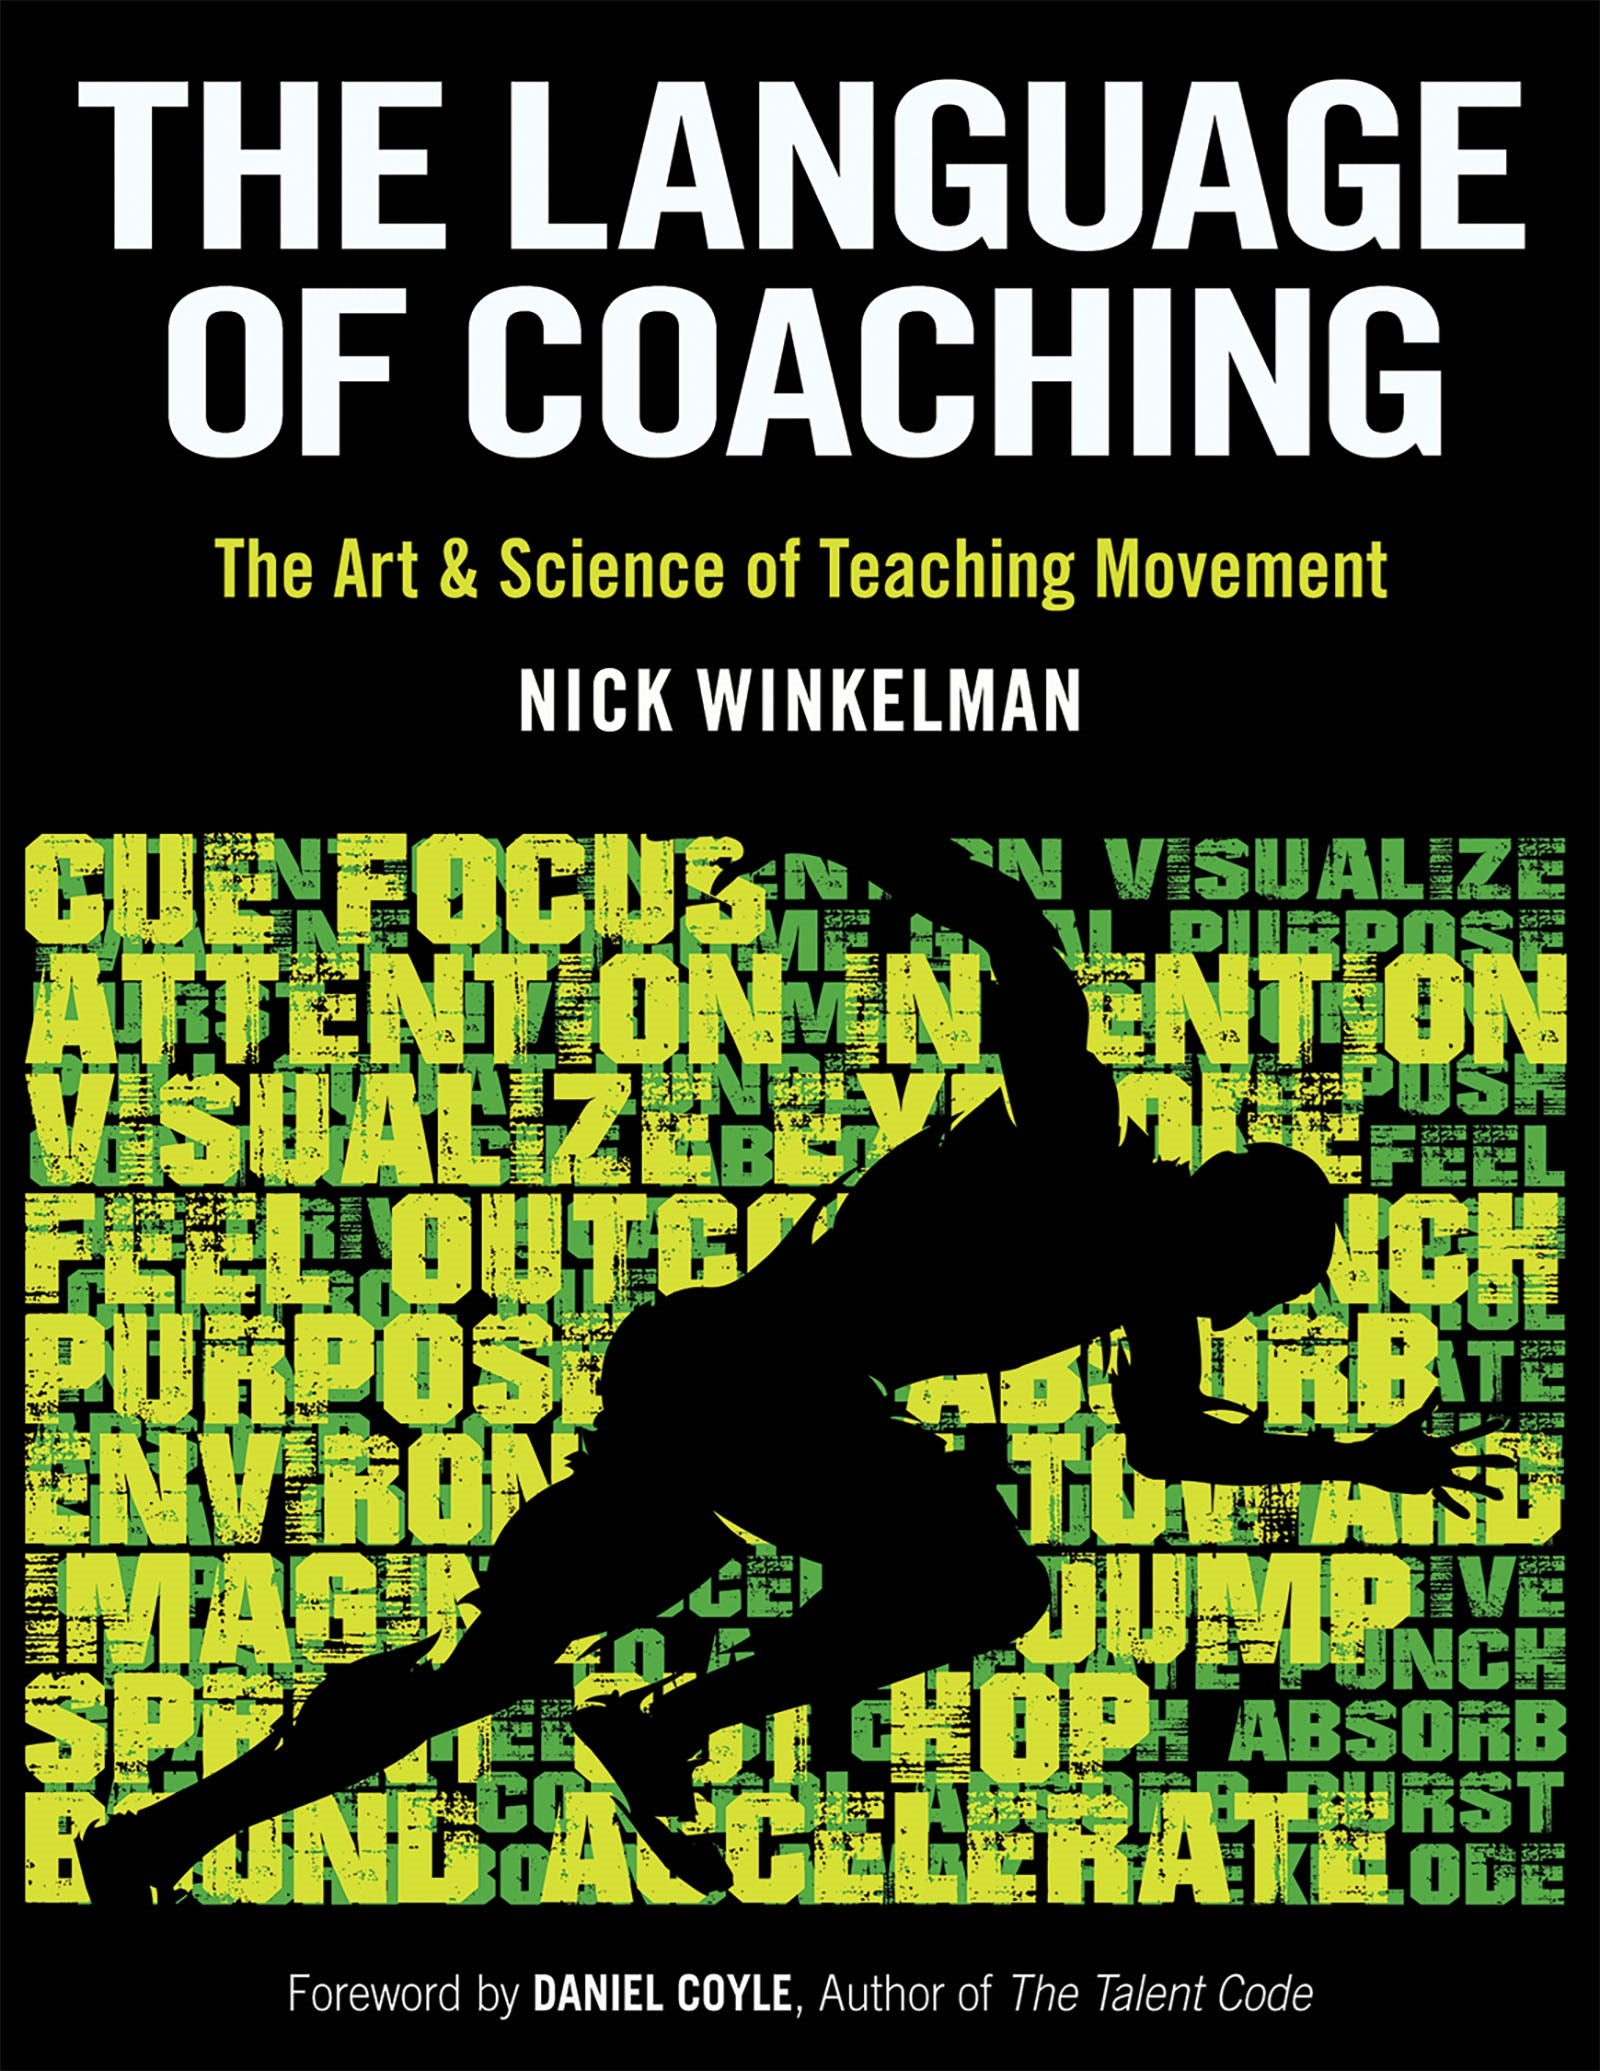 The Language of Coaching: The Art & Science of Teaching Movement